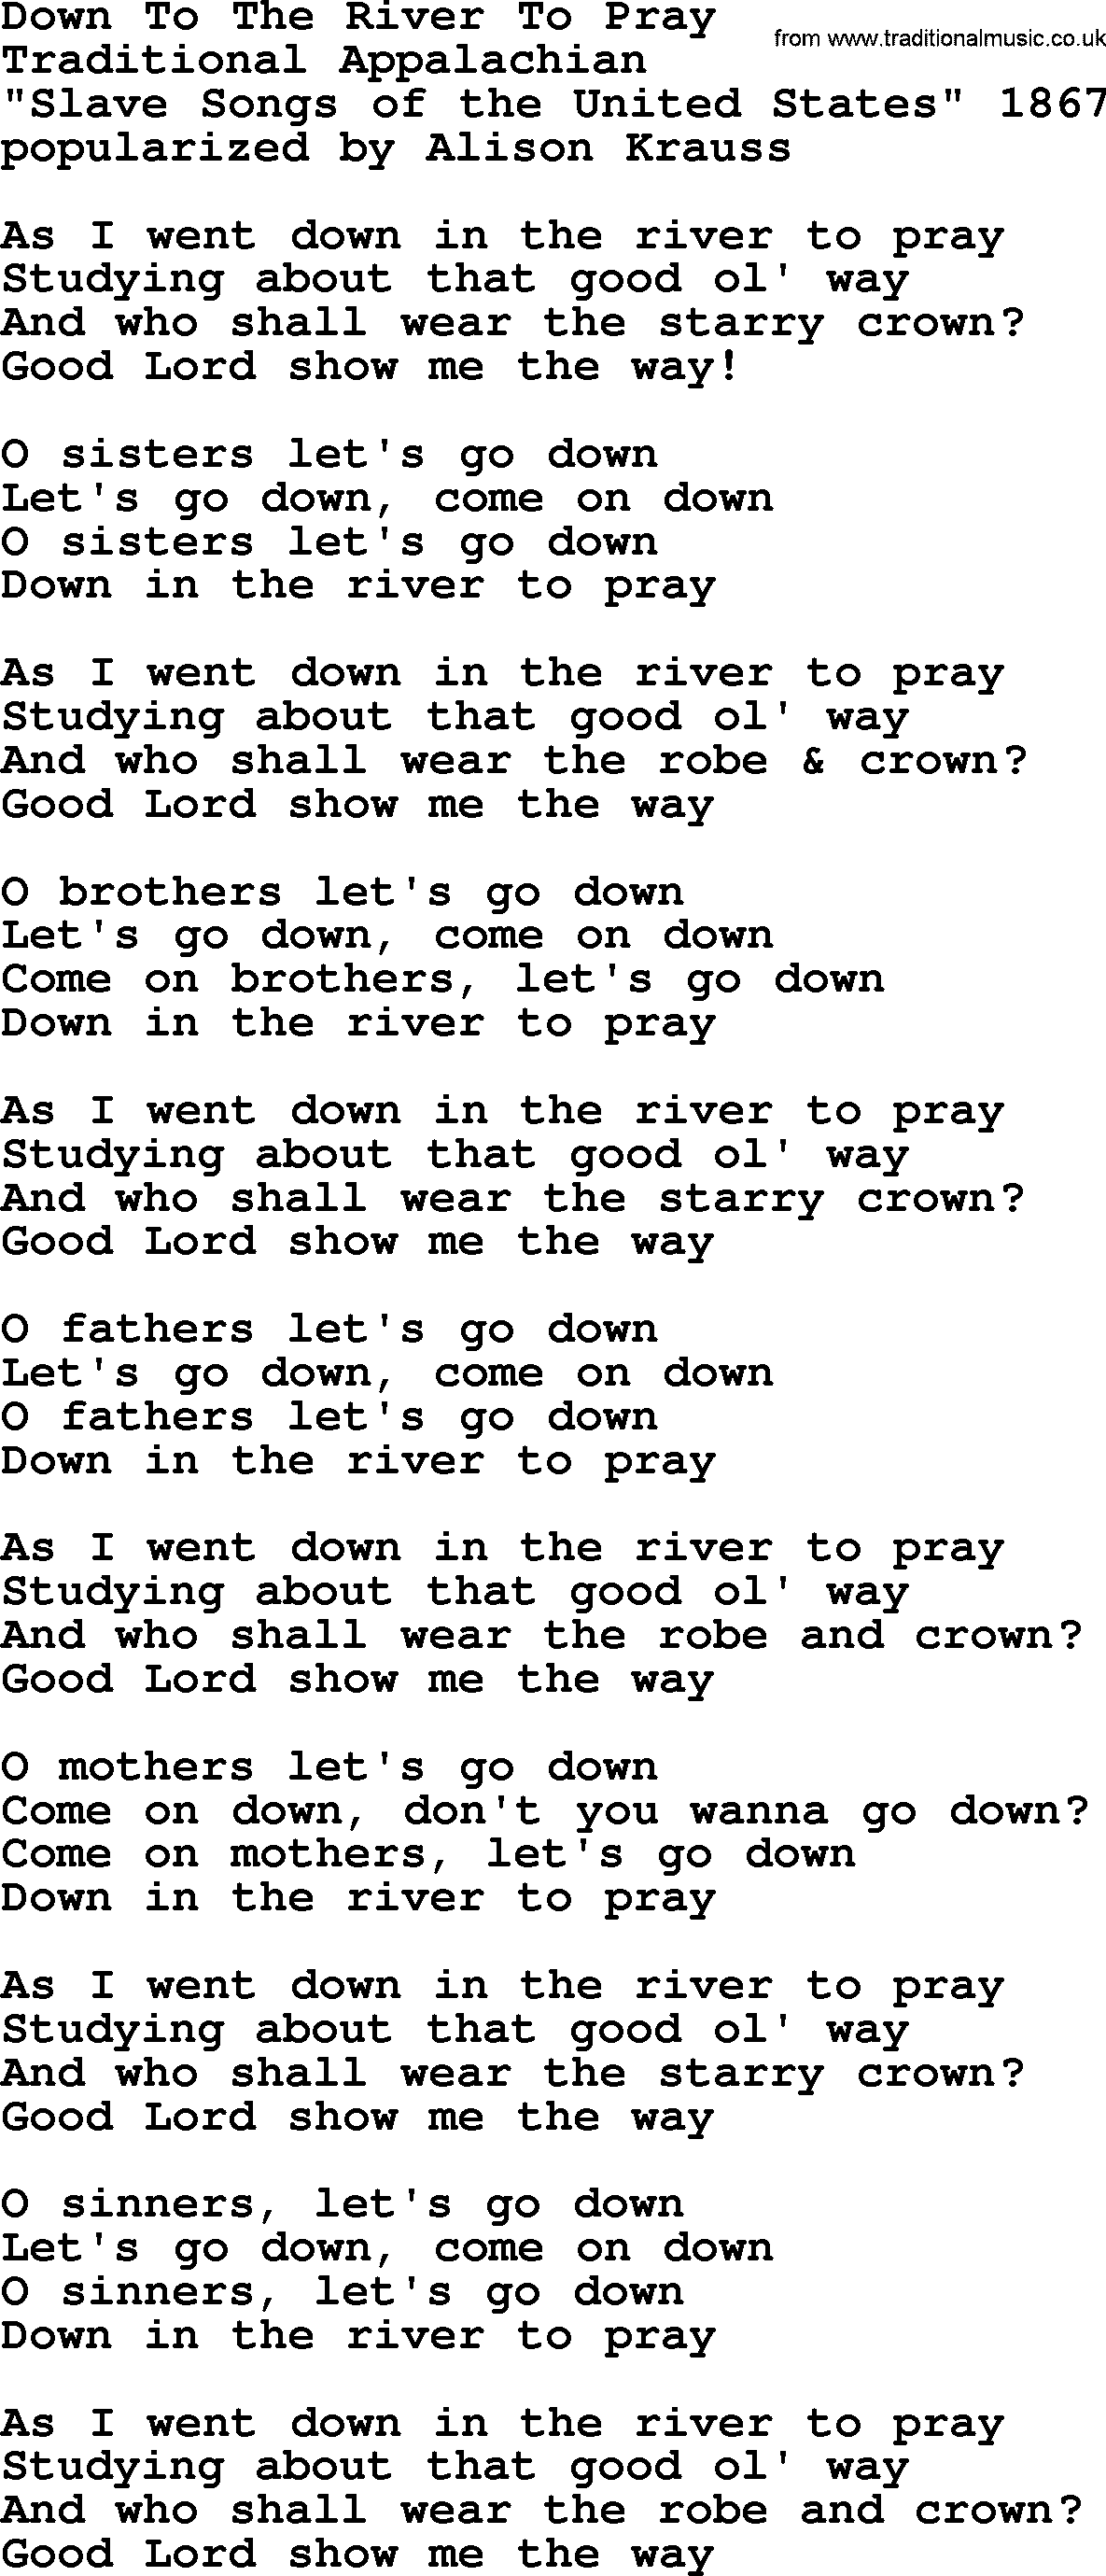 A collection of 500+ most sung Christian church hymns and songs, title: Down To The River To Pray, lyrics, PPTX and PDF